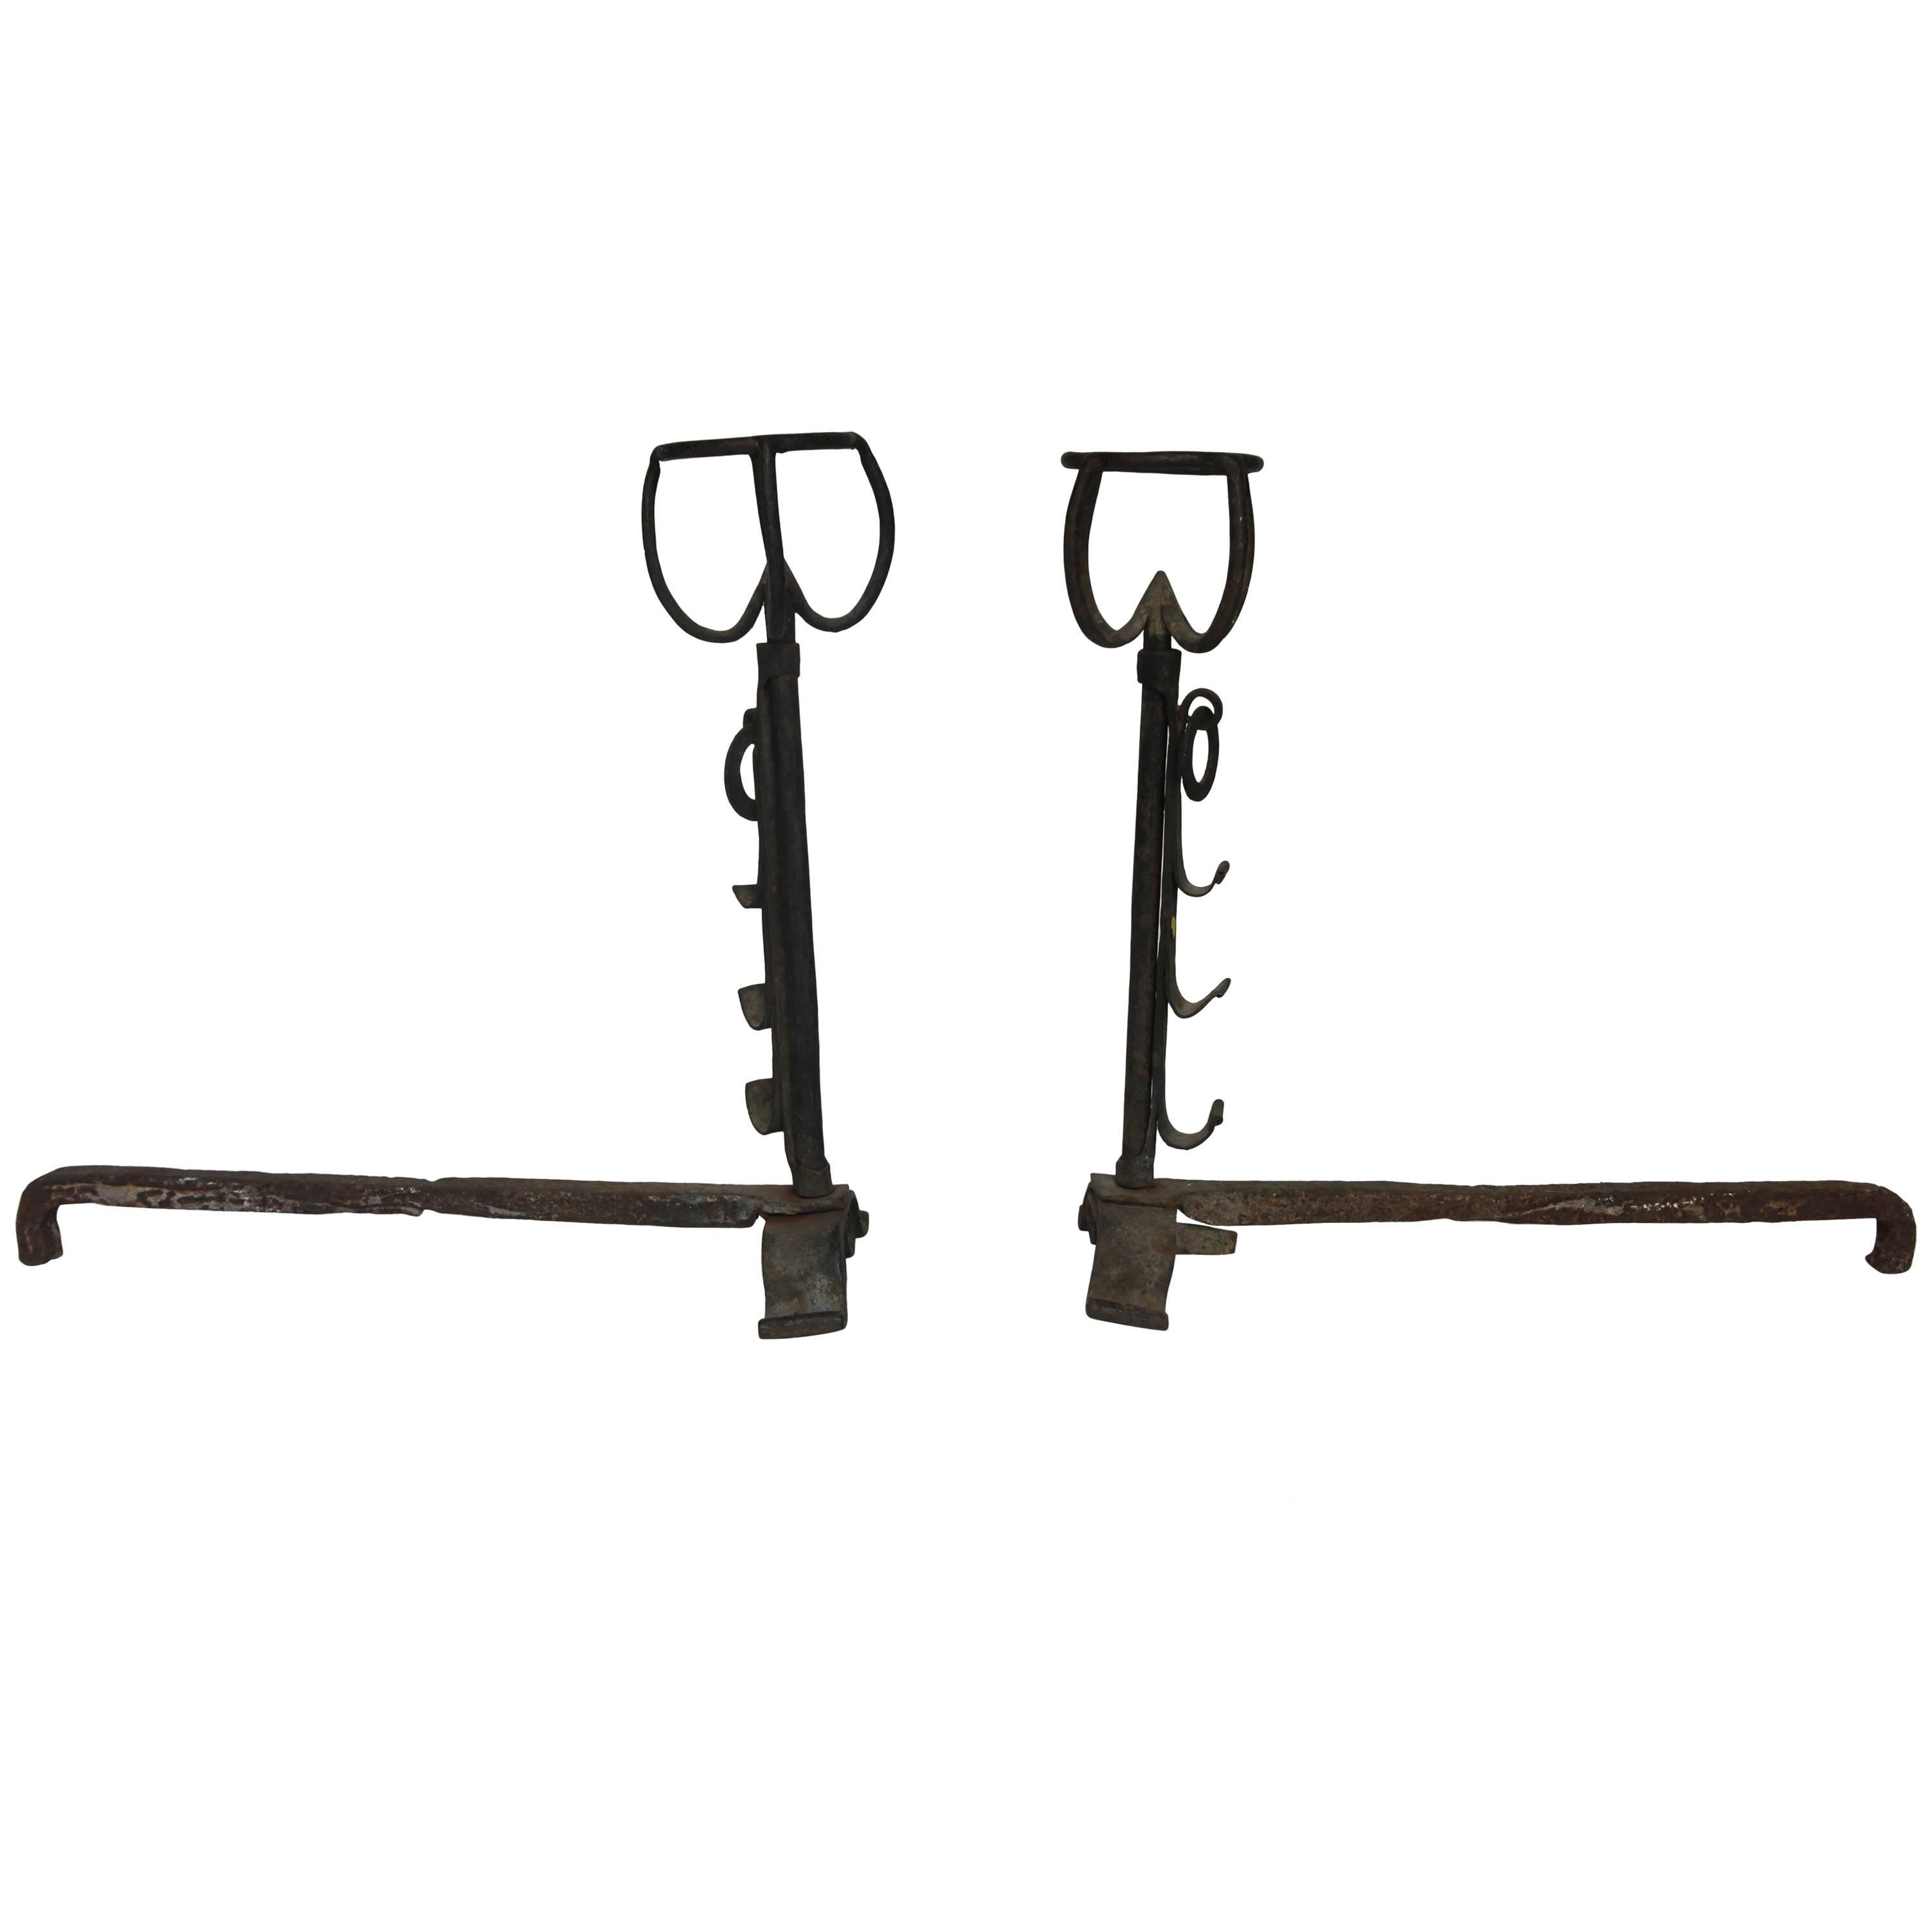 17th-18th Century Pair of French Gothic Iron Andirons "Landiers" or Fire Dogs